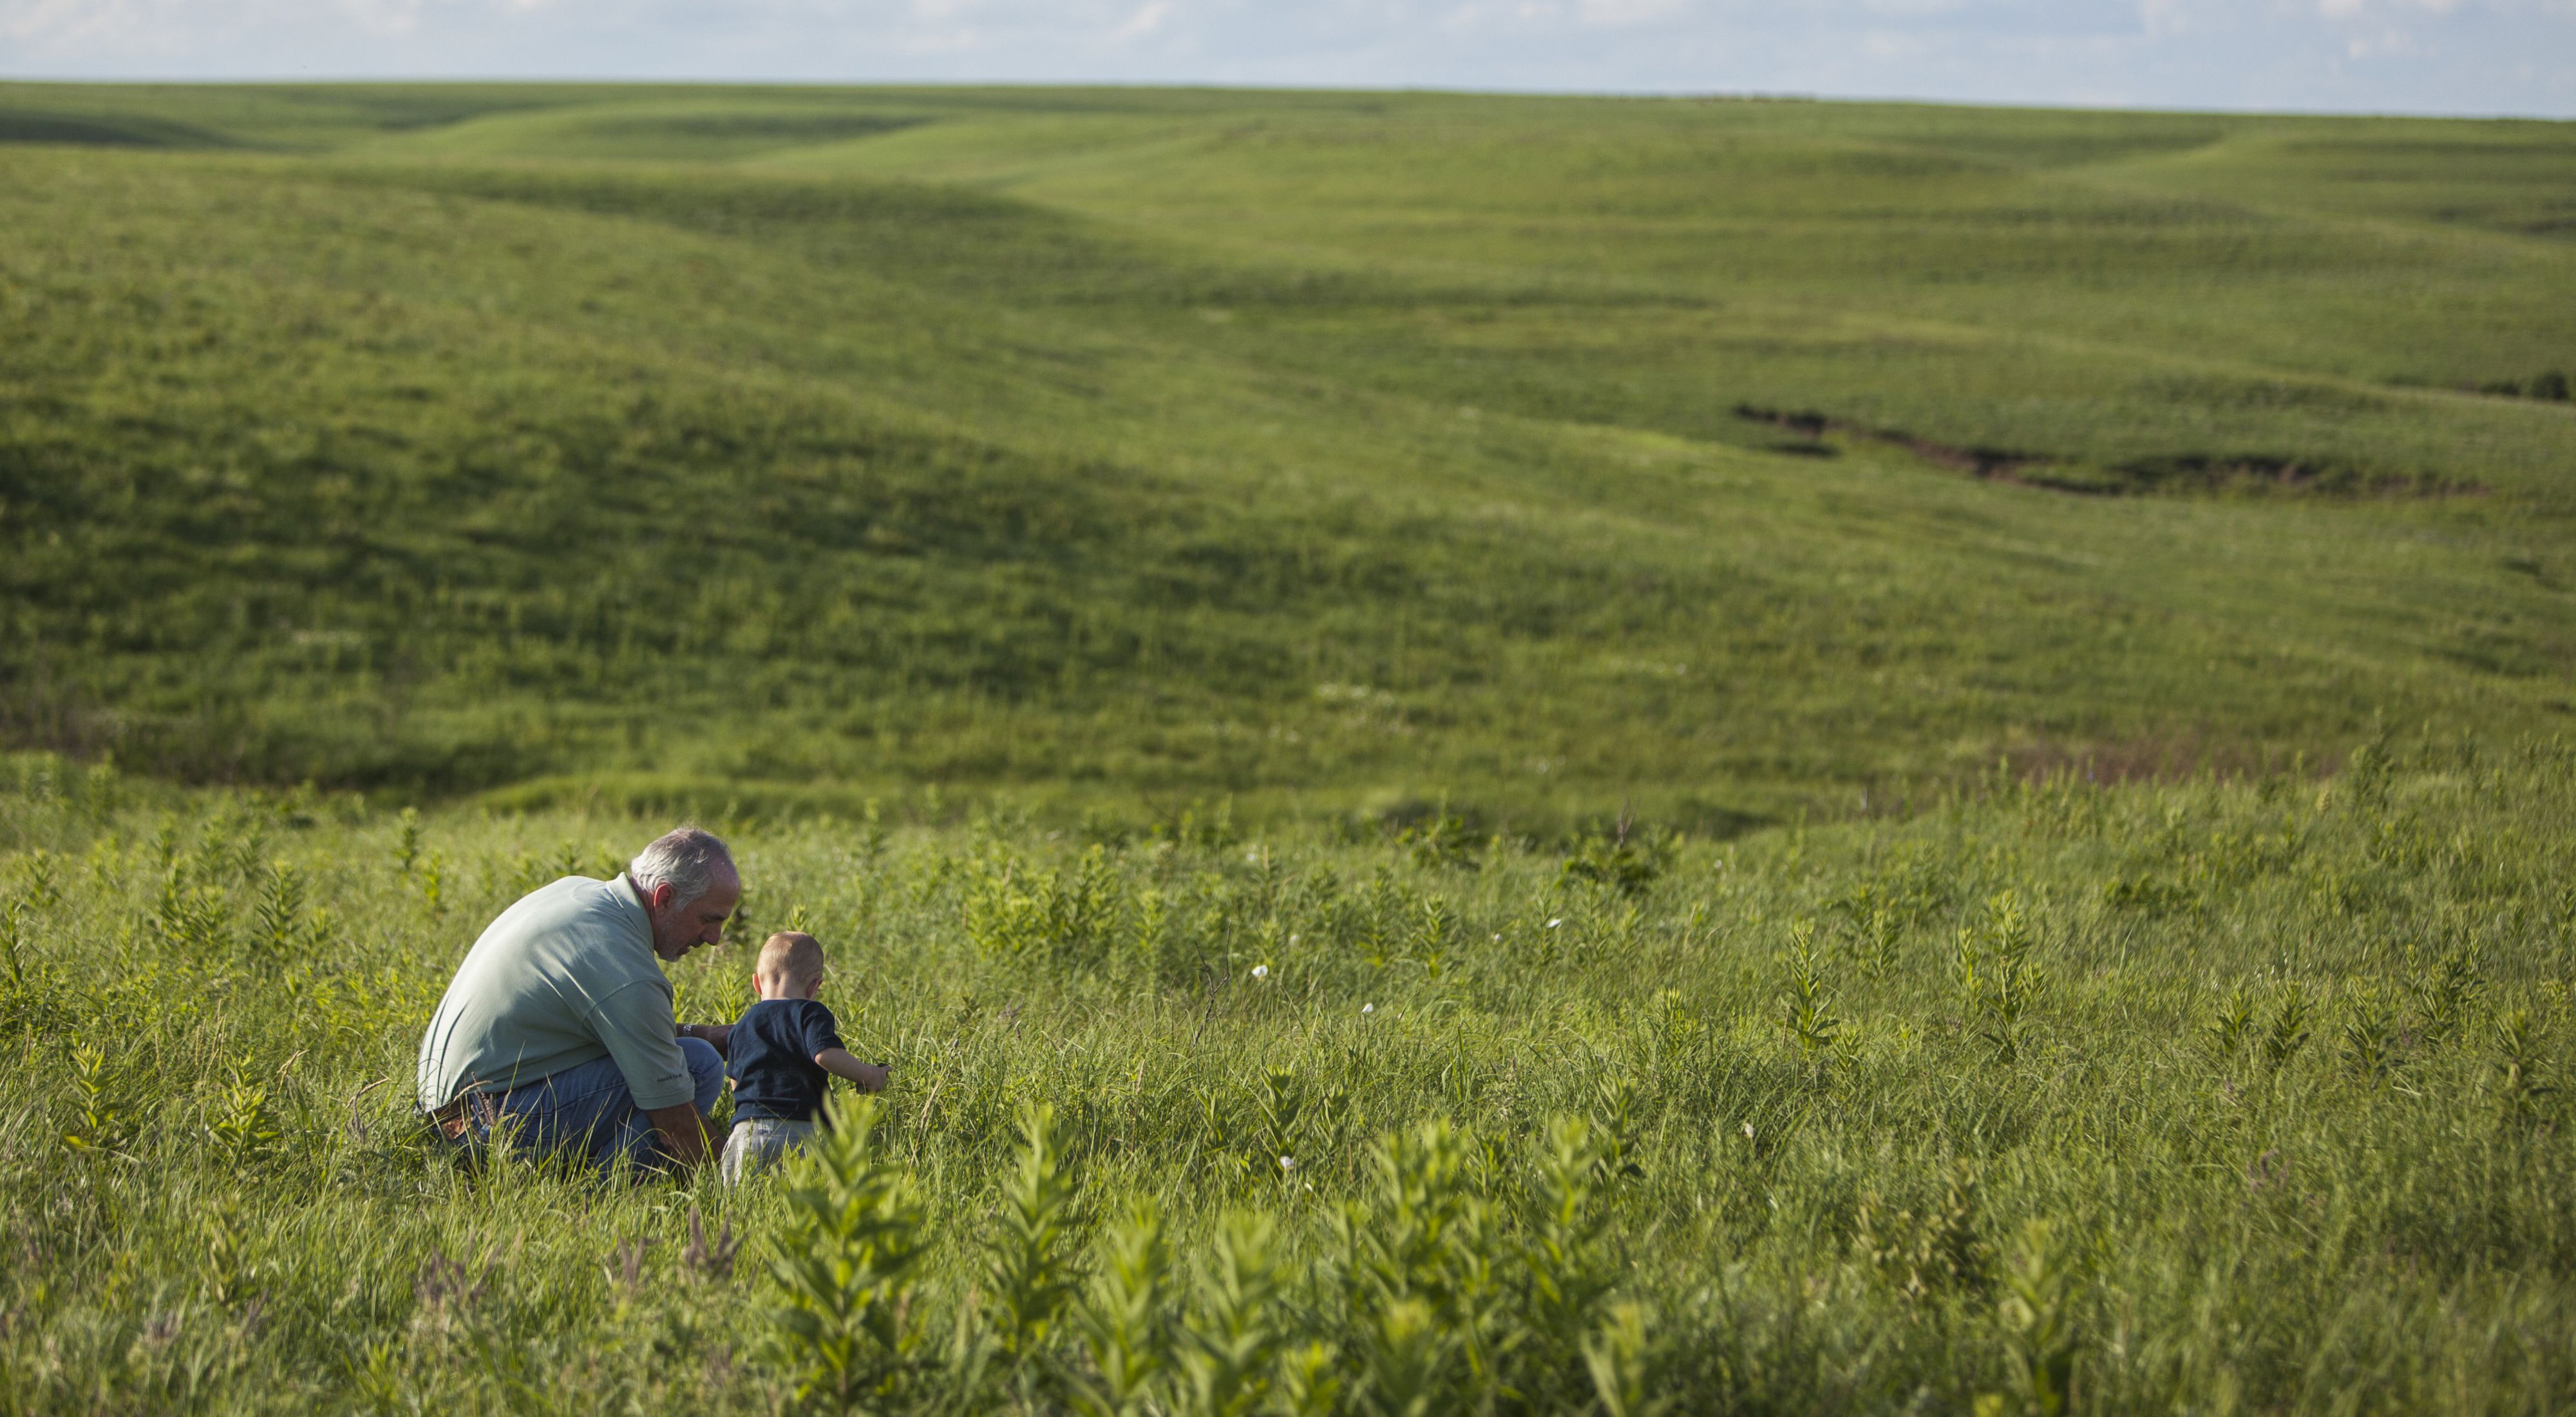 A grandfather and grandson examine the plants in a vast field of green tallgrass prairie.